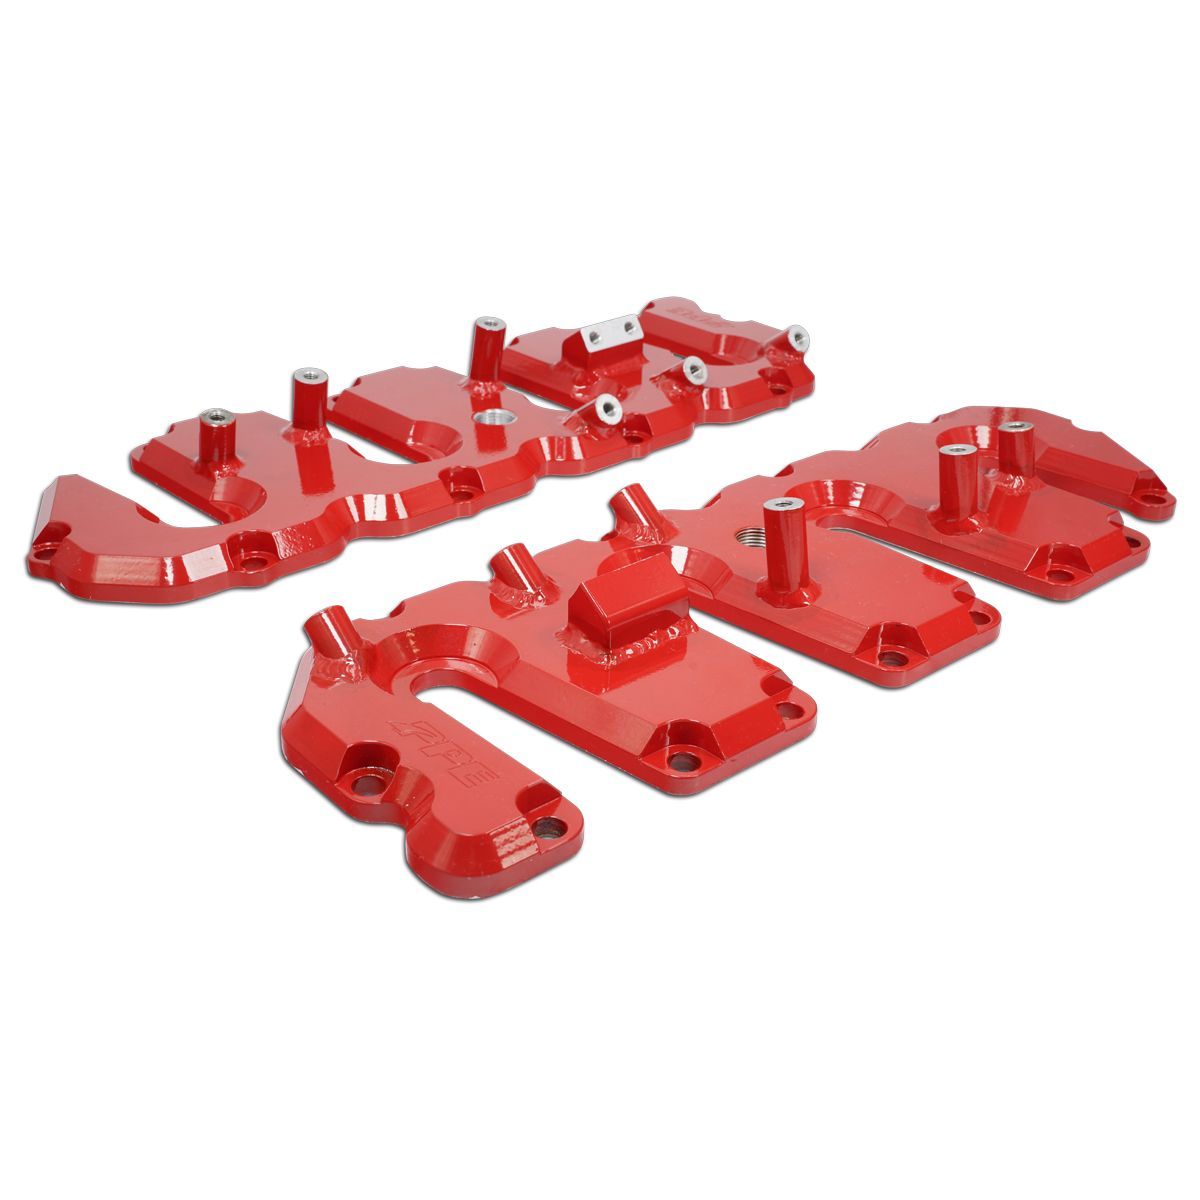 PPE - PPE Performance Billet Aluminum Valve Cover Kit - With Pillars (Red) For 04.5-10 6.6 Duramax